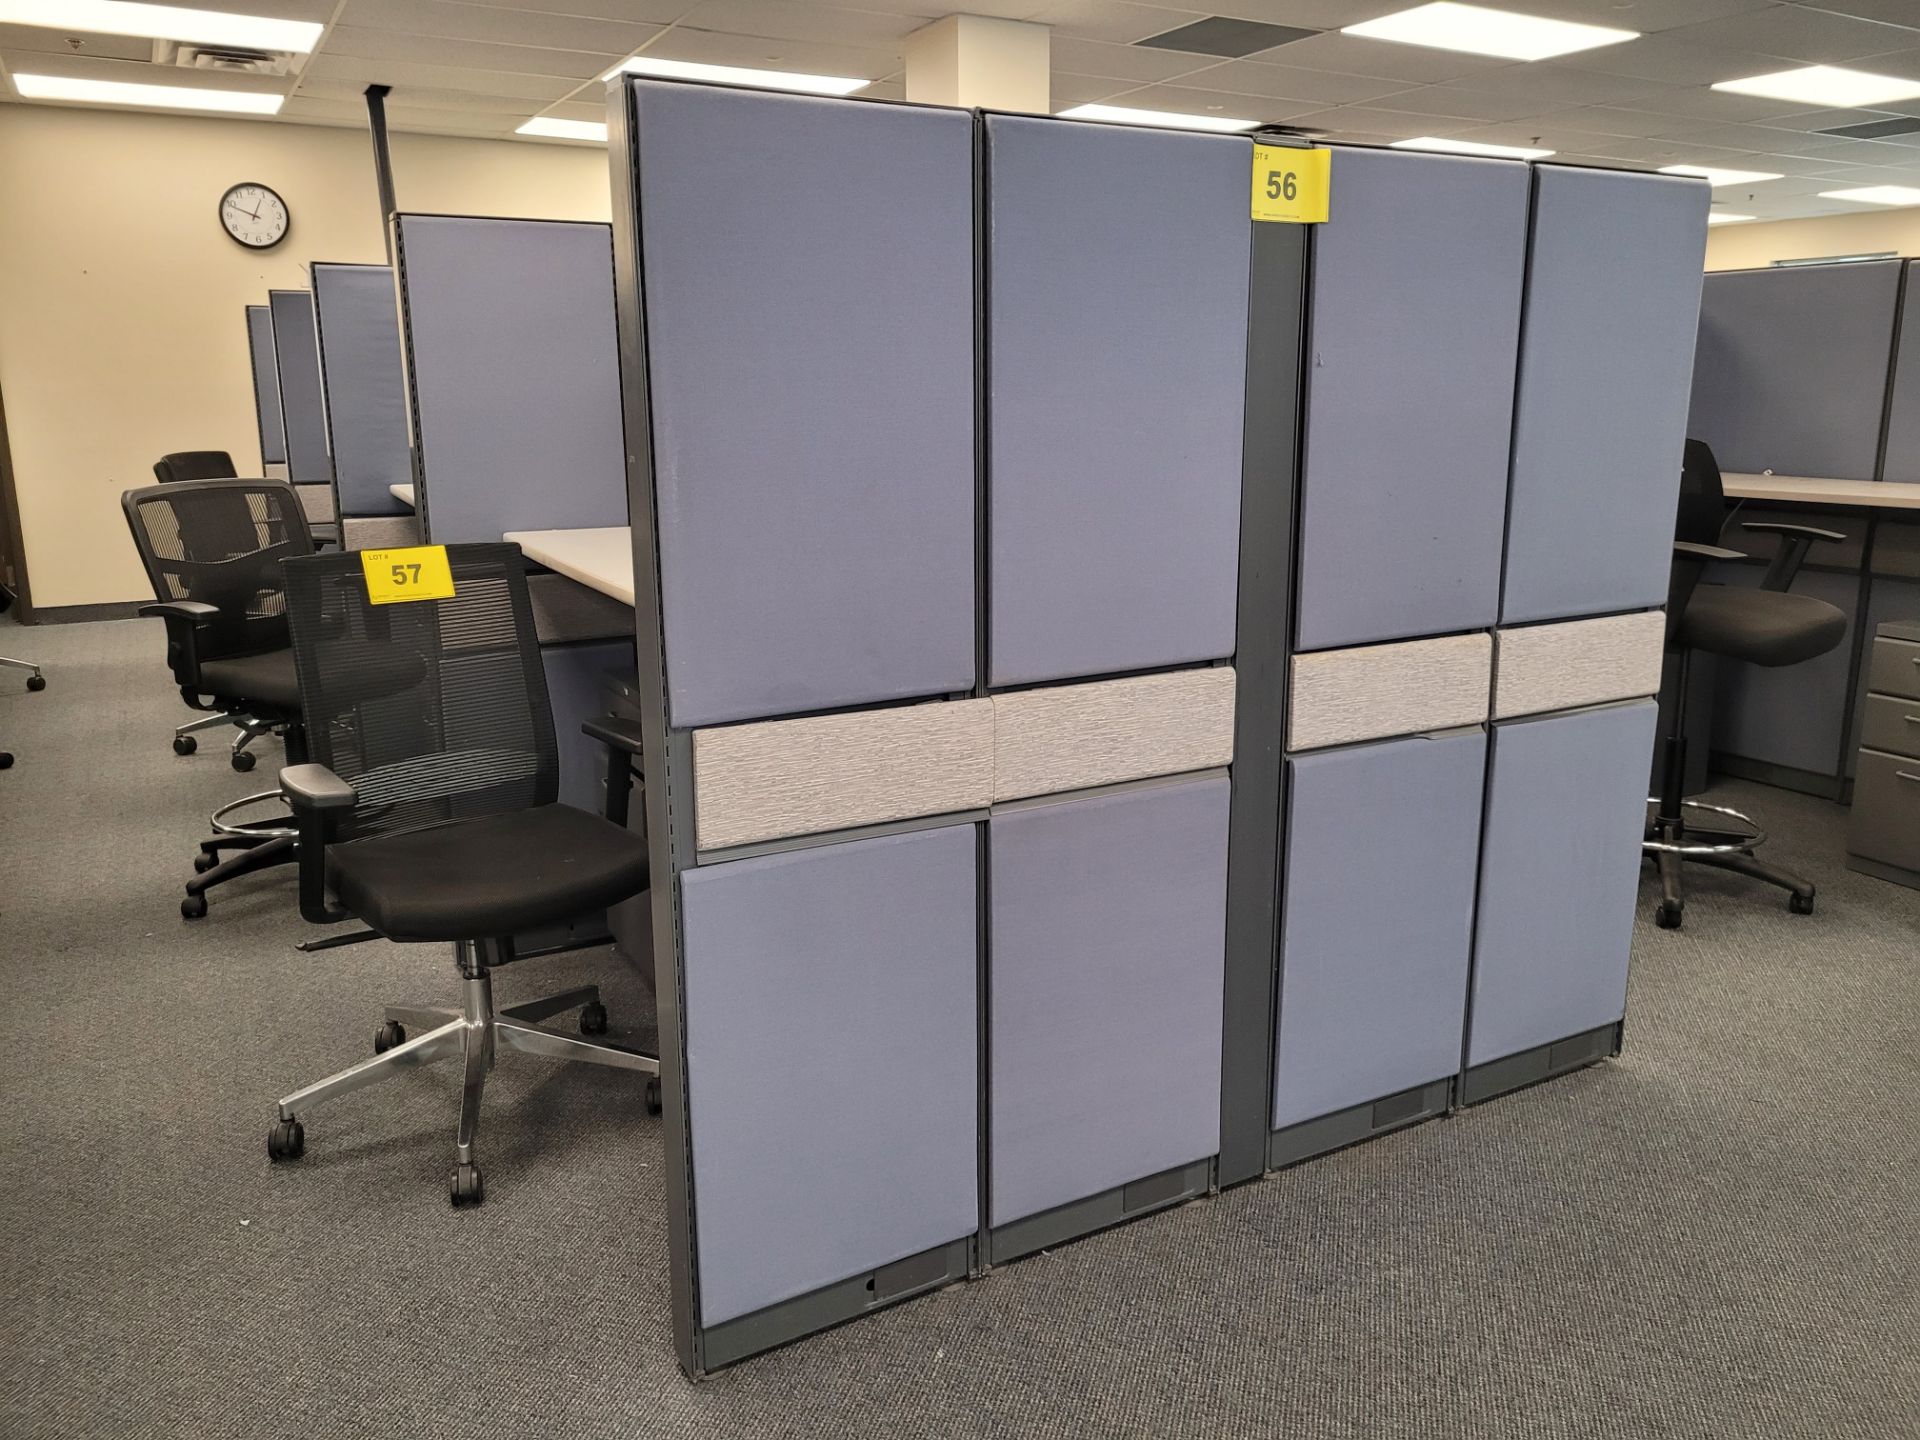 LOT - 4 STATION TEKNION CUBICLE - (NO CHAIRS, NO CONTENTS)